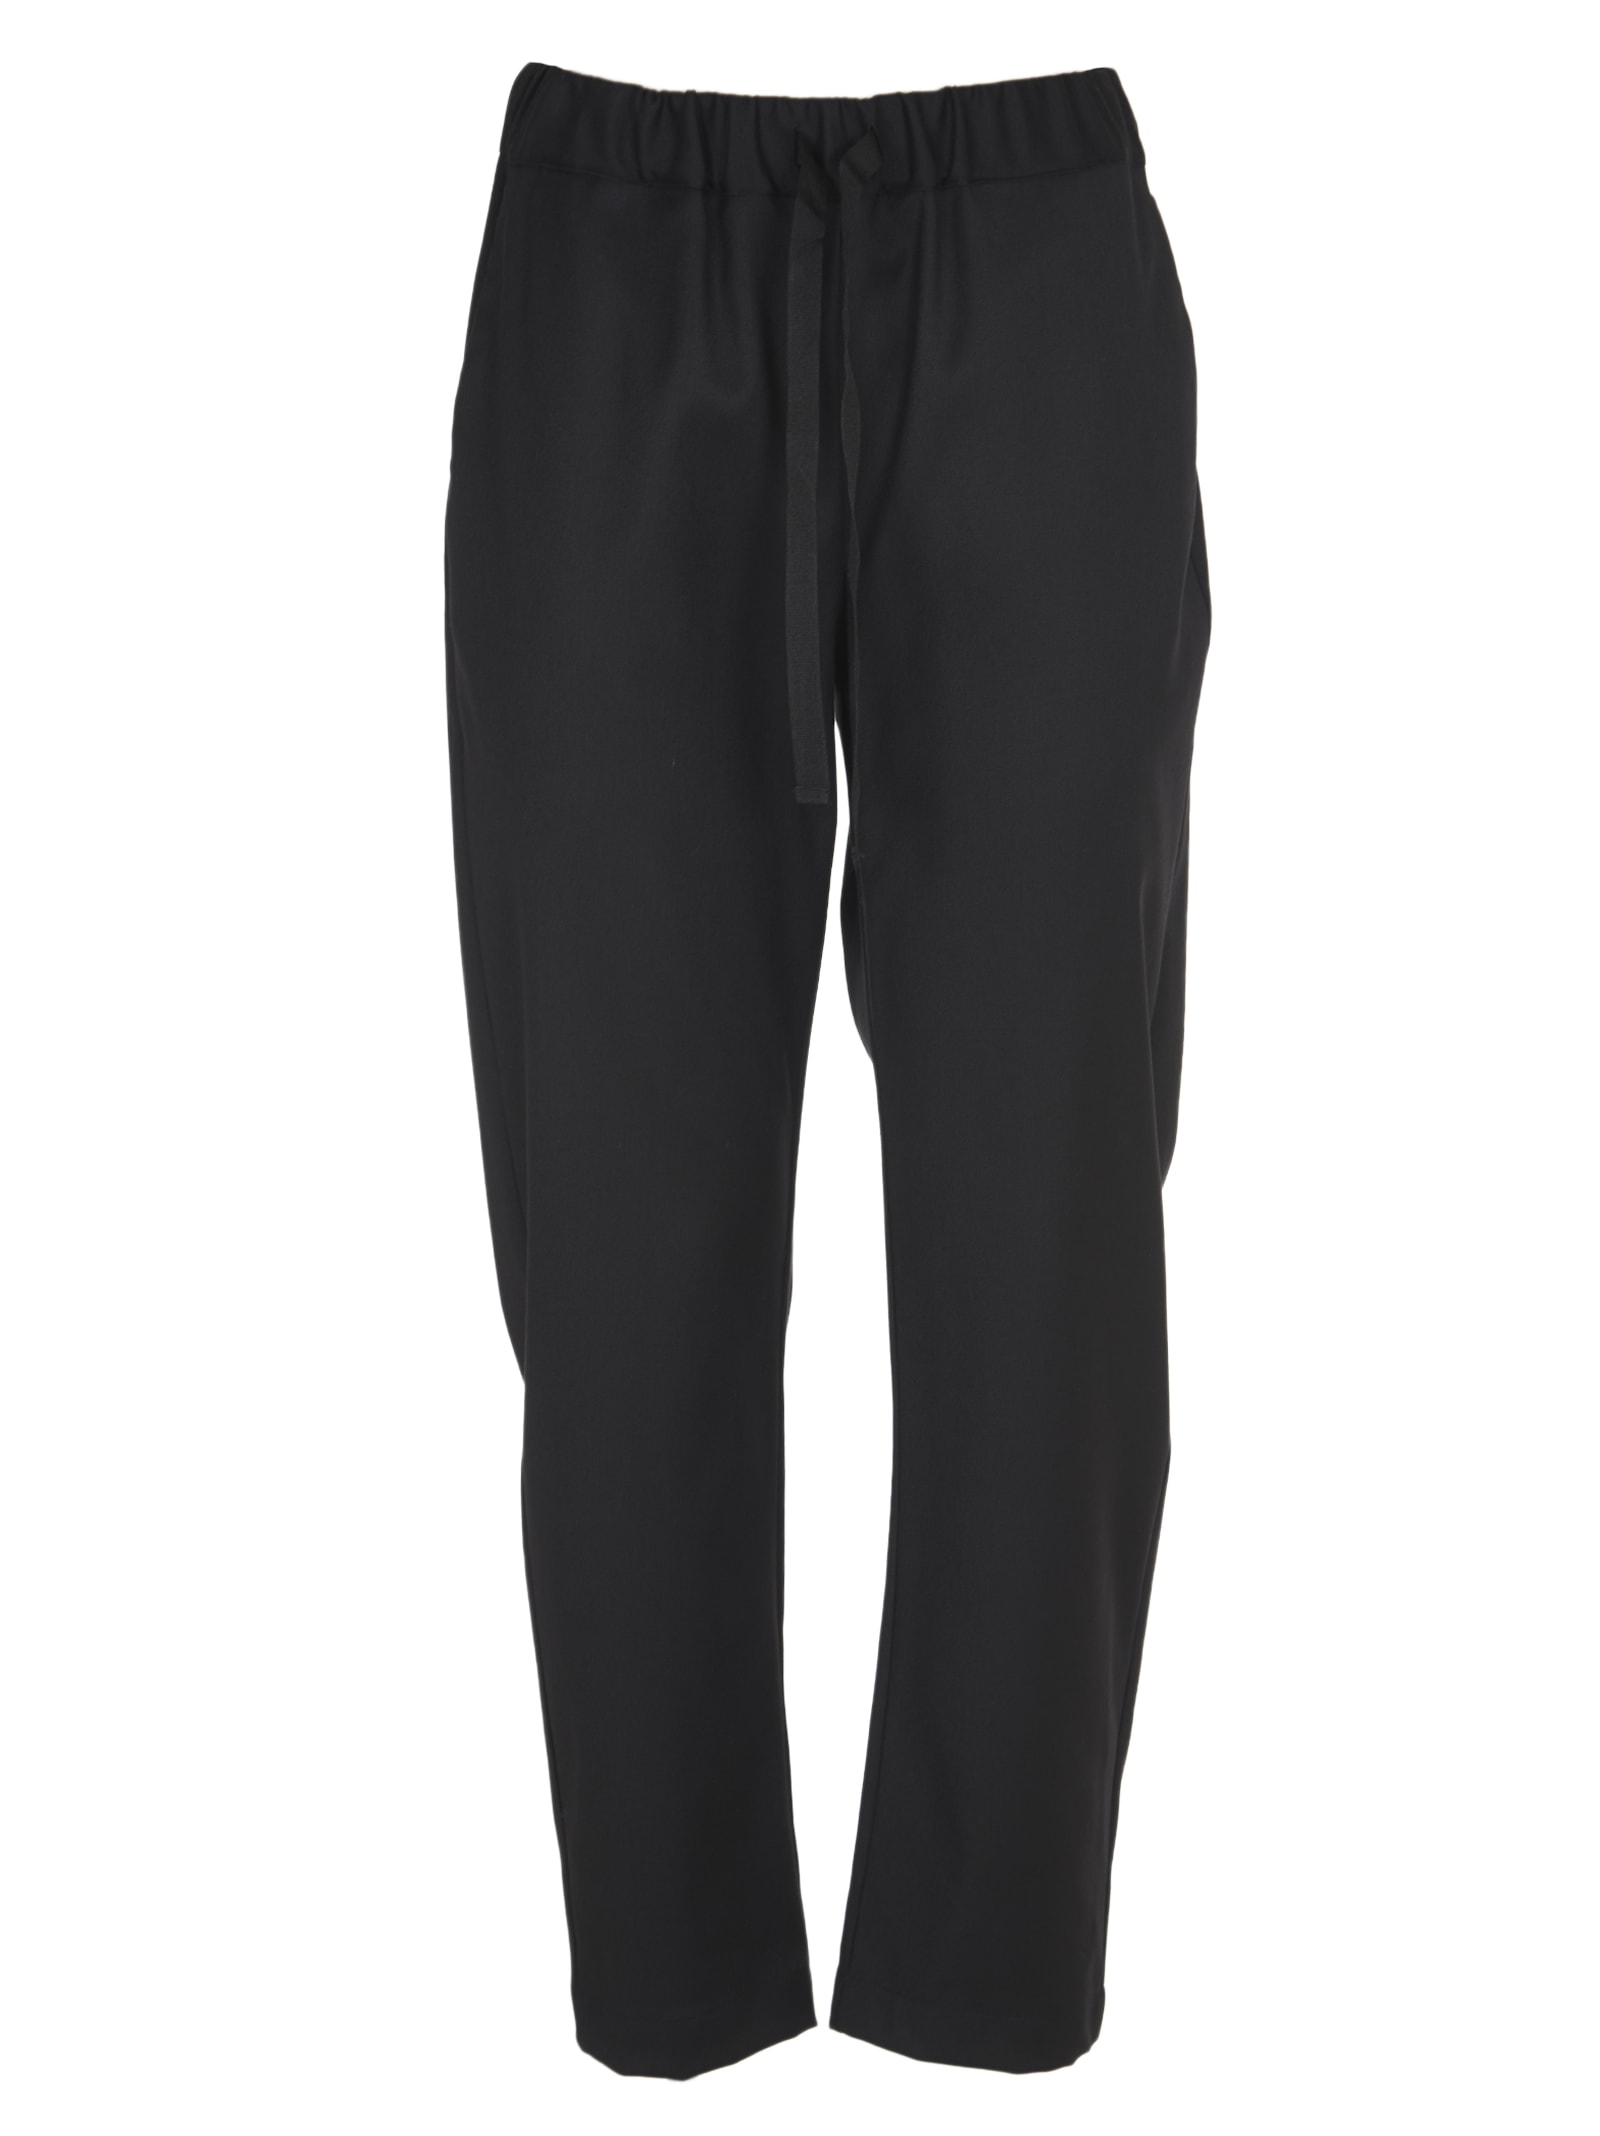 SEMICOUTURE Black Wool Trousers